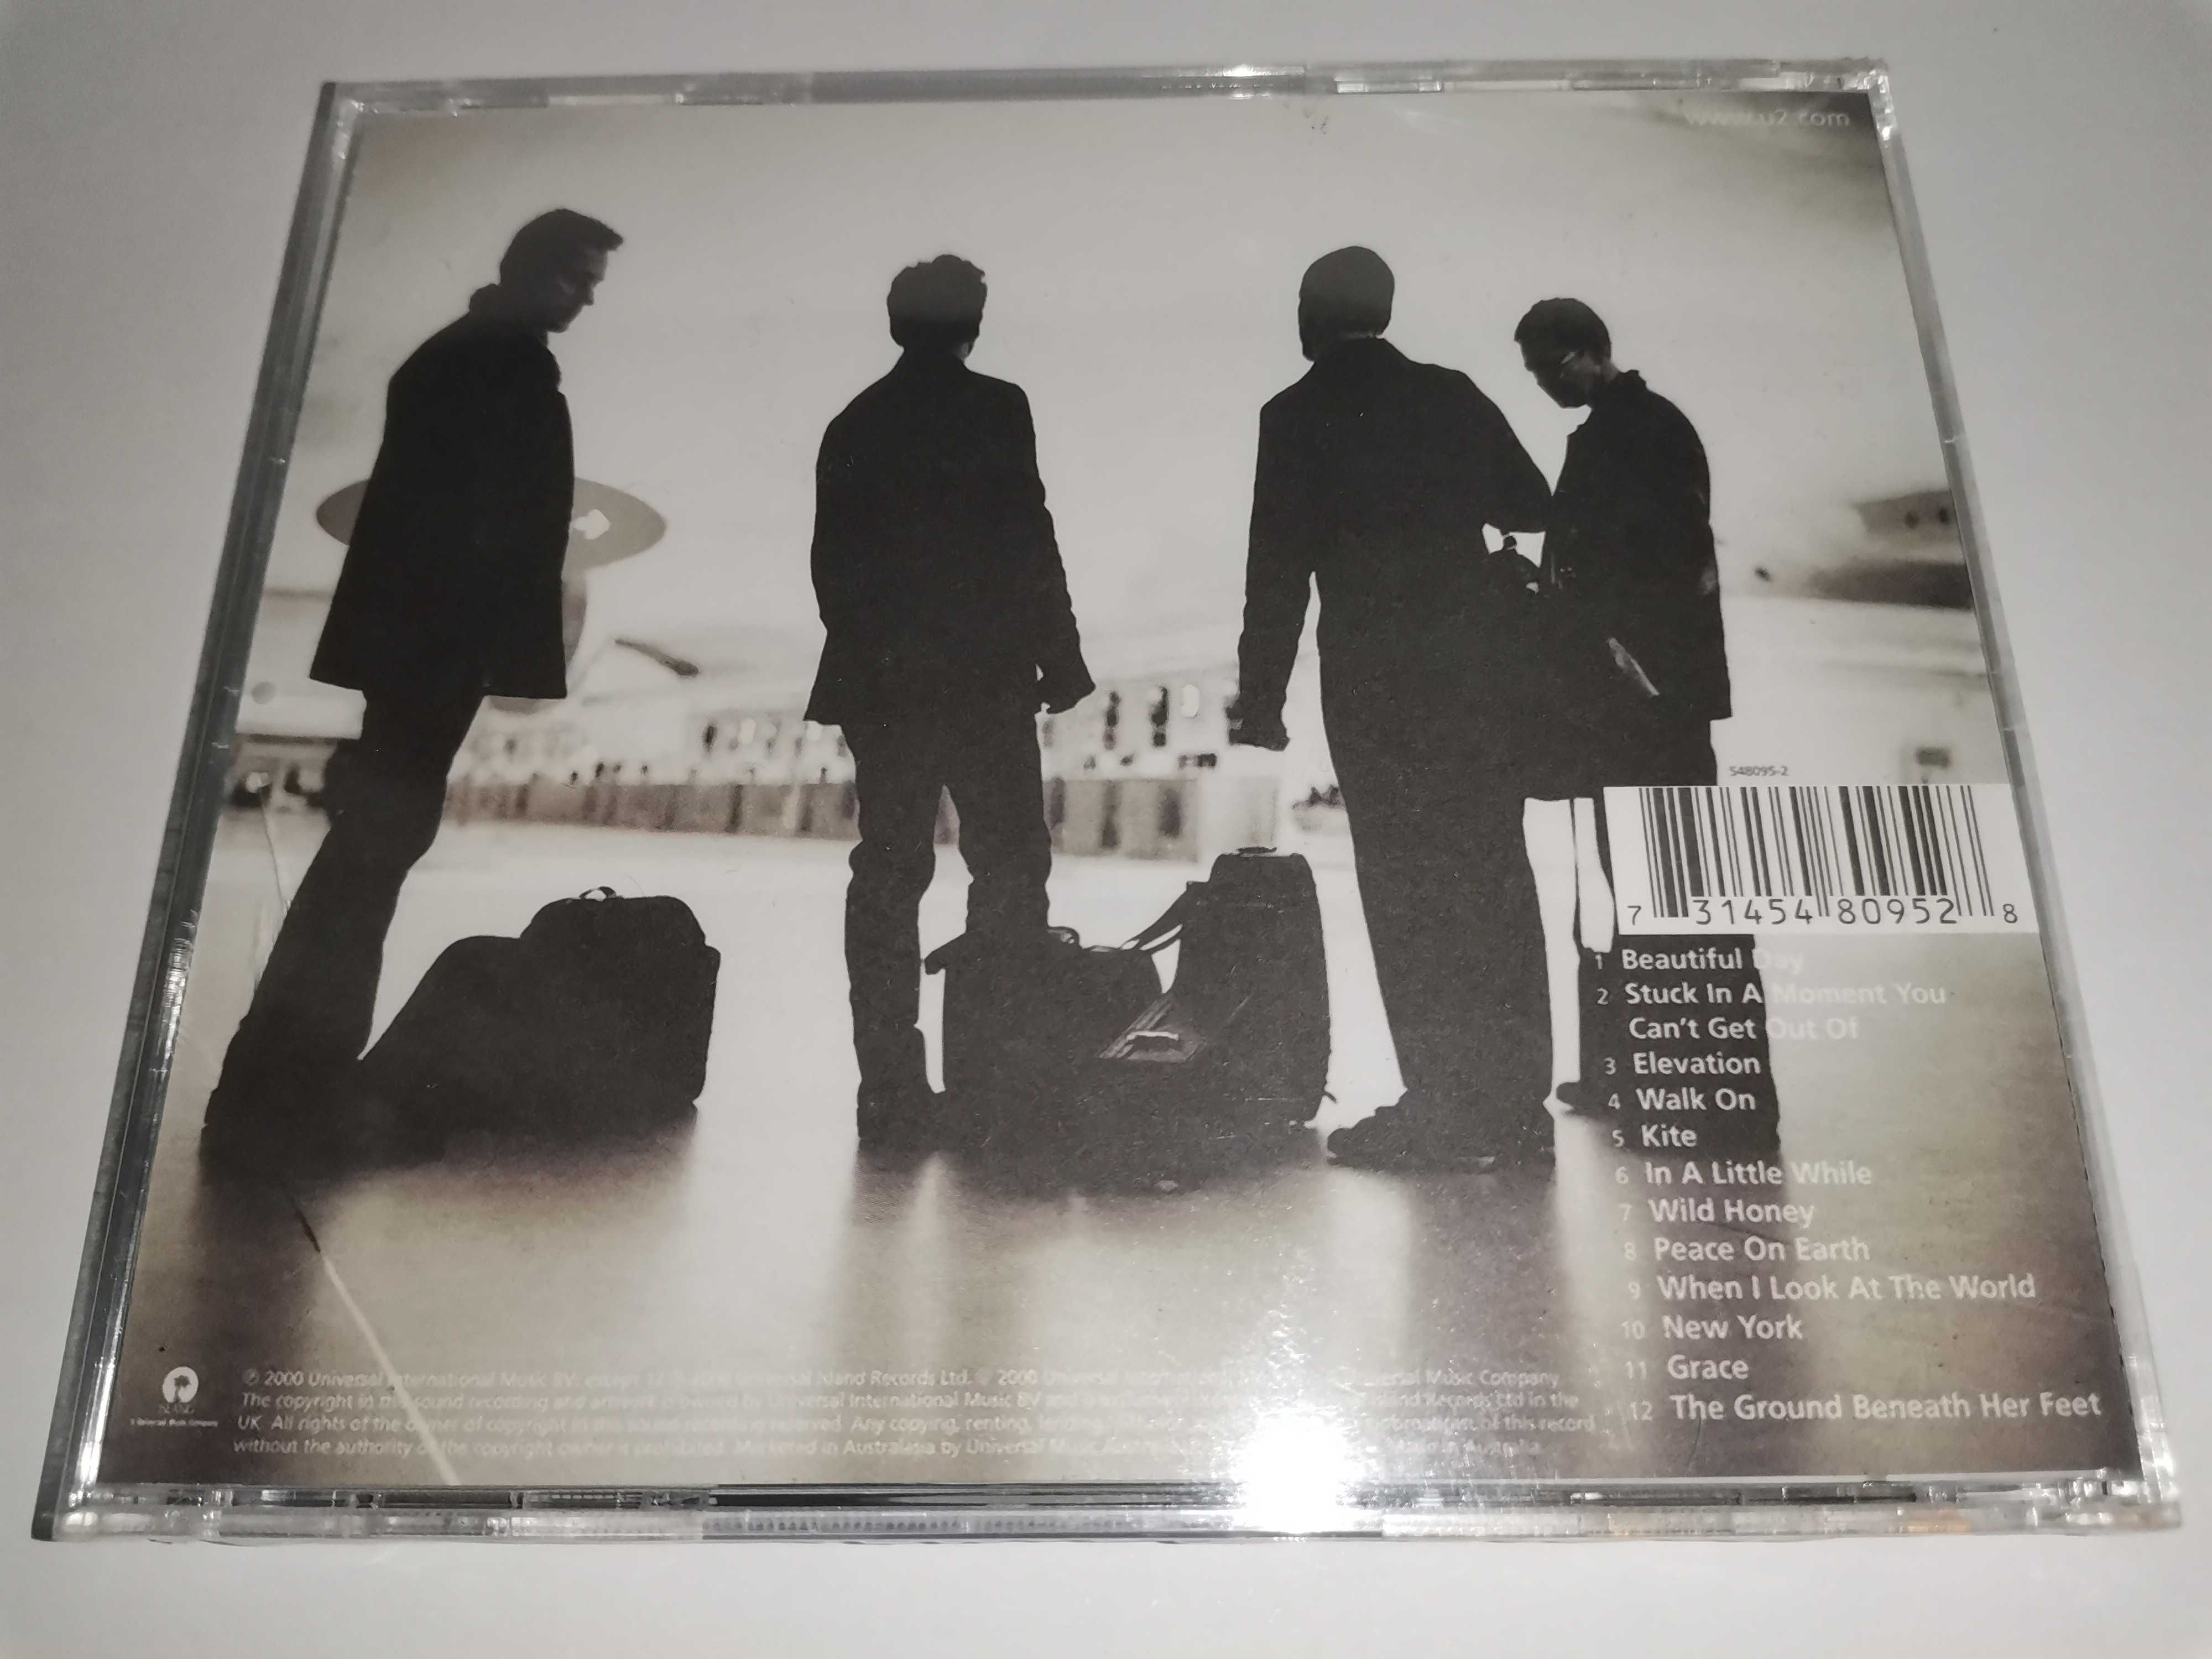 U2 edition - CD All That you Cant Leave Behind